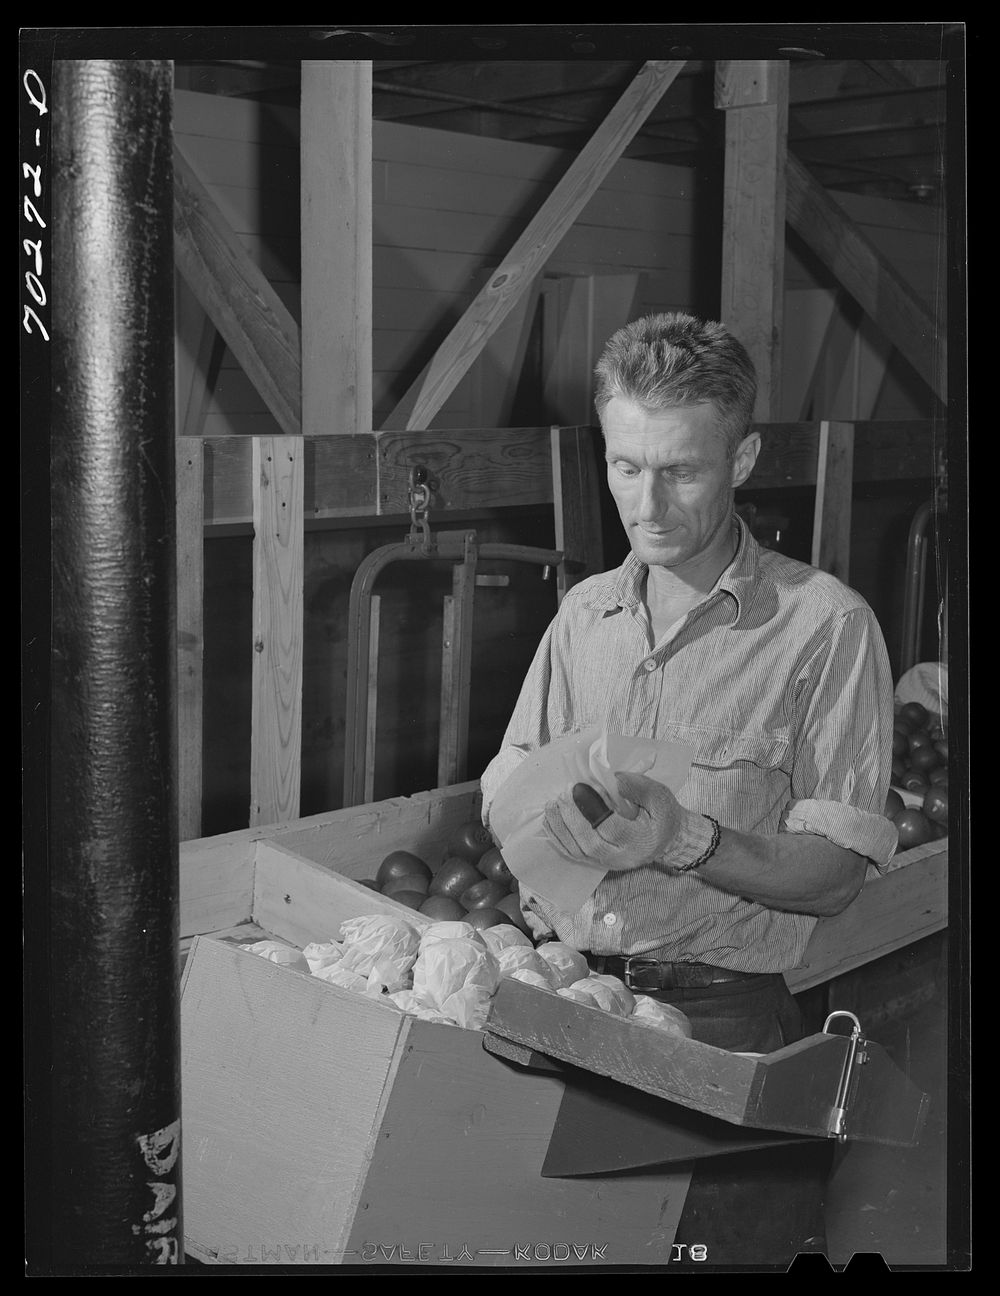 Farm worker practicing wrapping apples in the apple wrapping school at the FSA (Farm Security Administration) farm family…